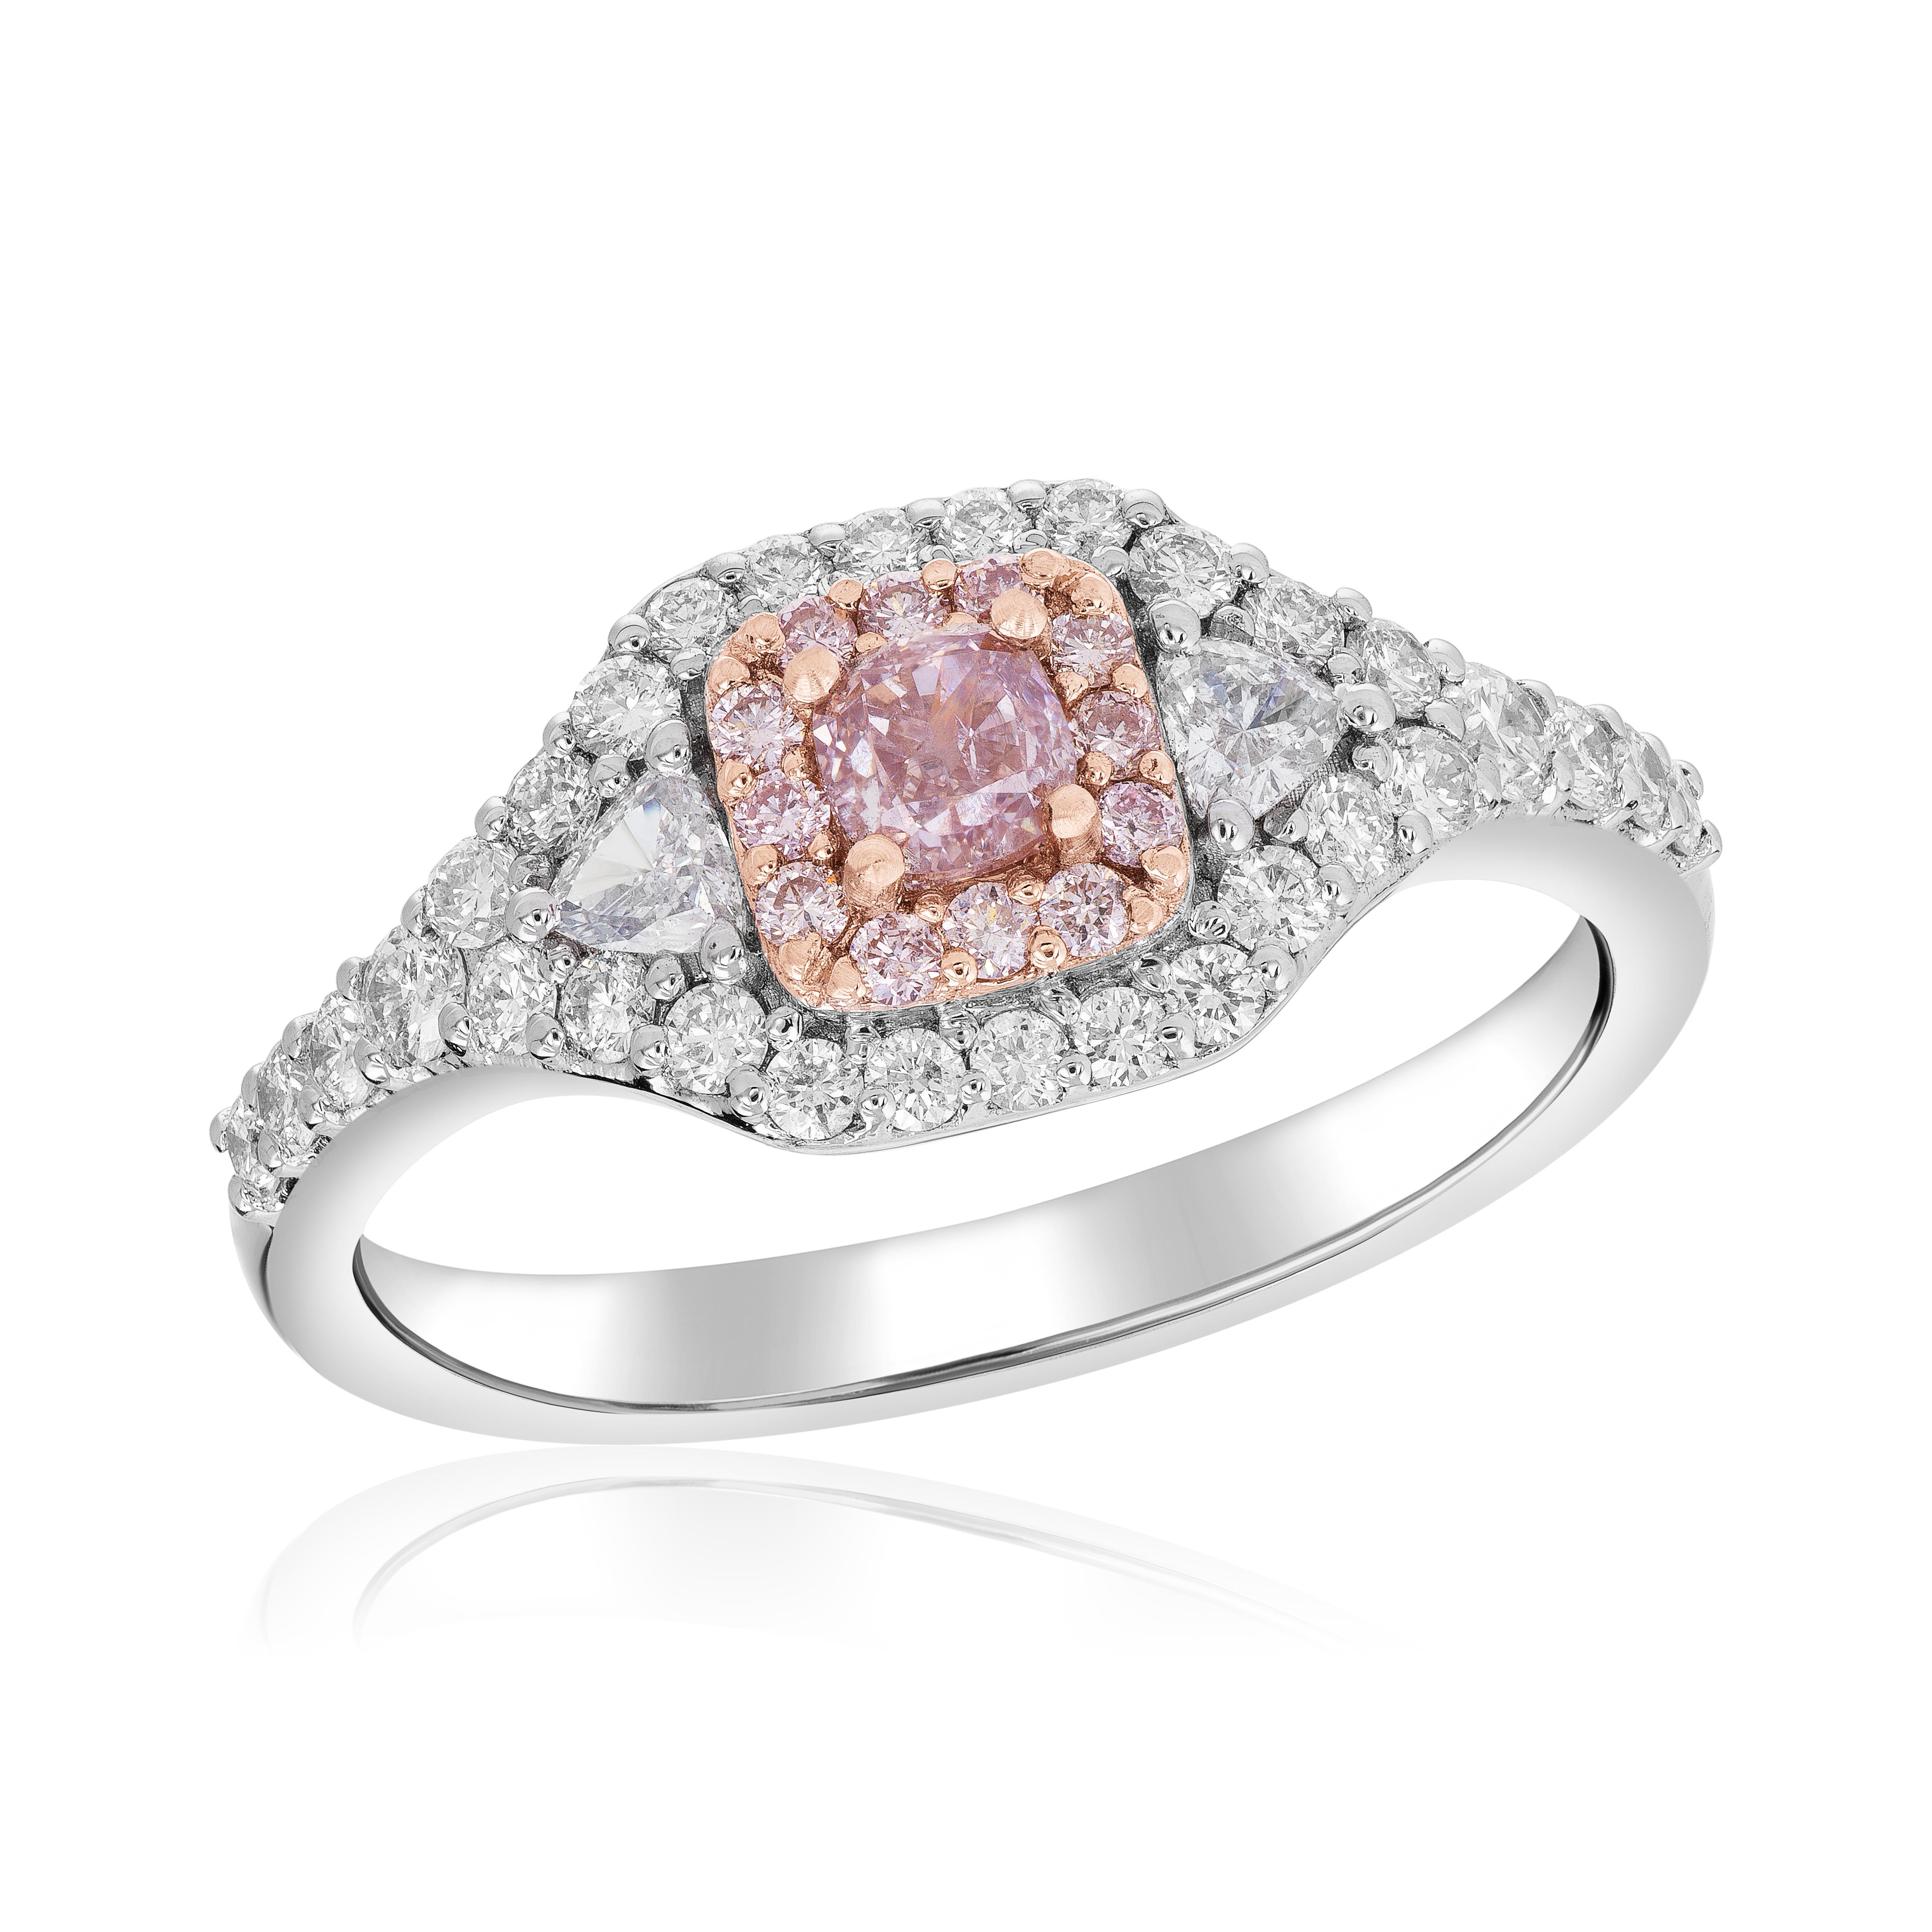 Make a statement with this stunning blush pink diamond ring that exudes elegance and charm. The centerpiece of this ring is a mesmerizing .27 carat cushion-cut pink diamond, captivating the beholder with its delicate and romantic hue. Complementing